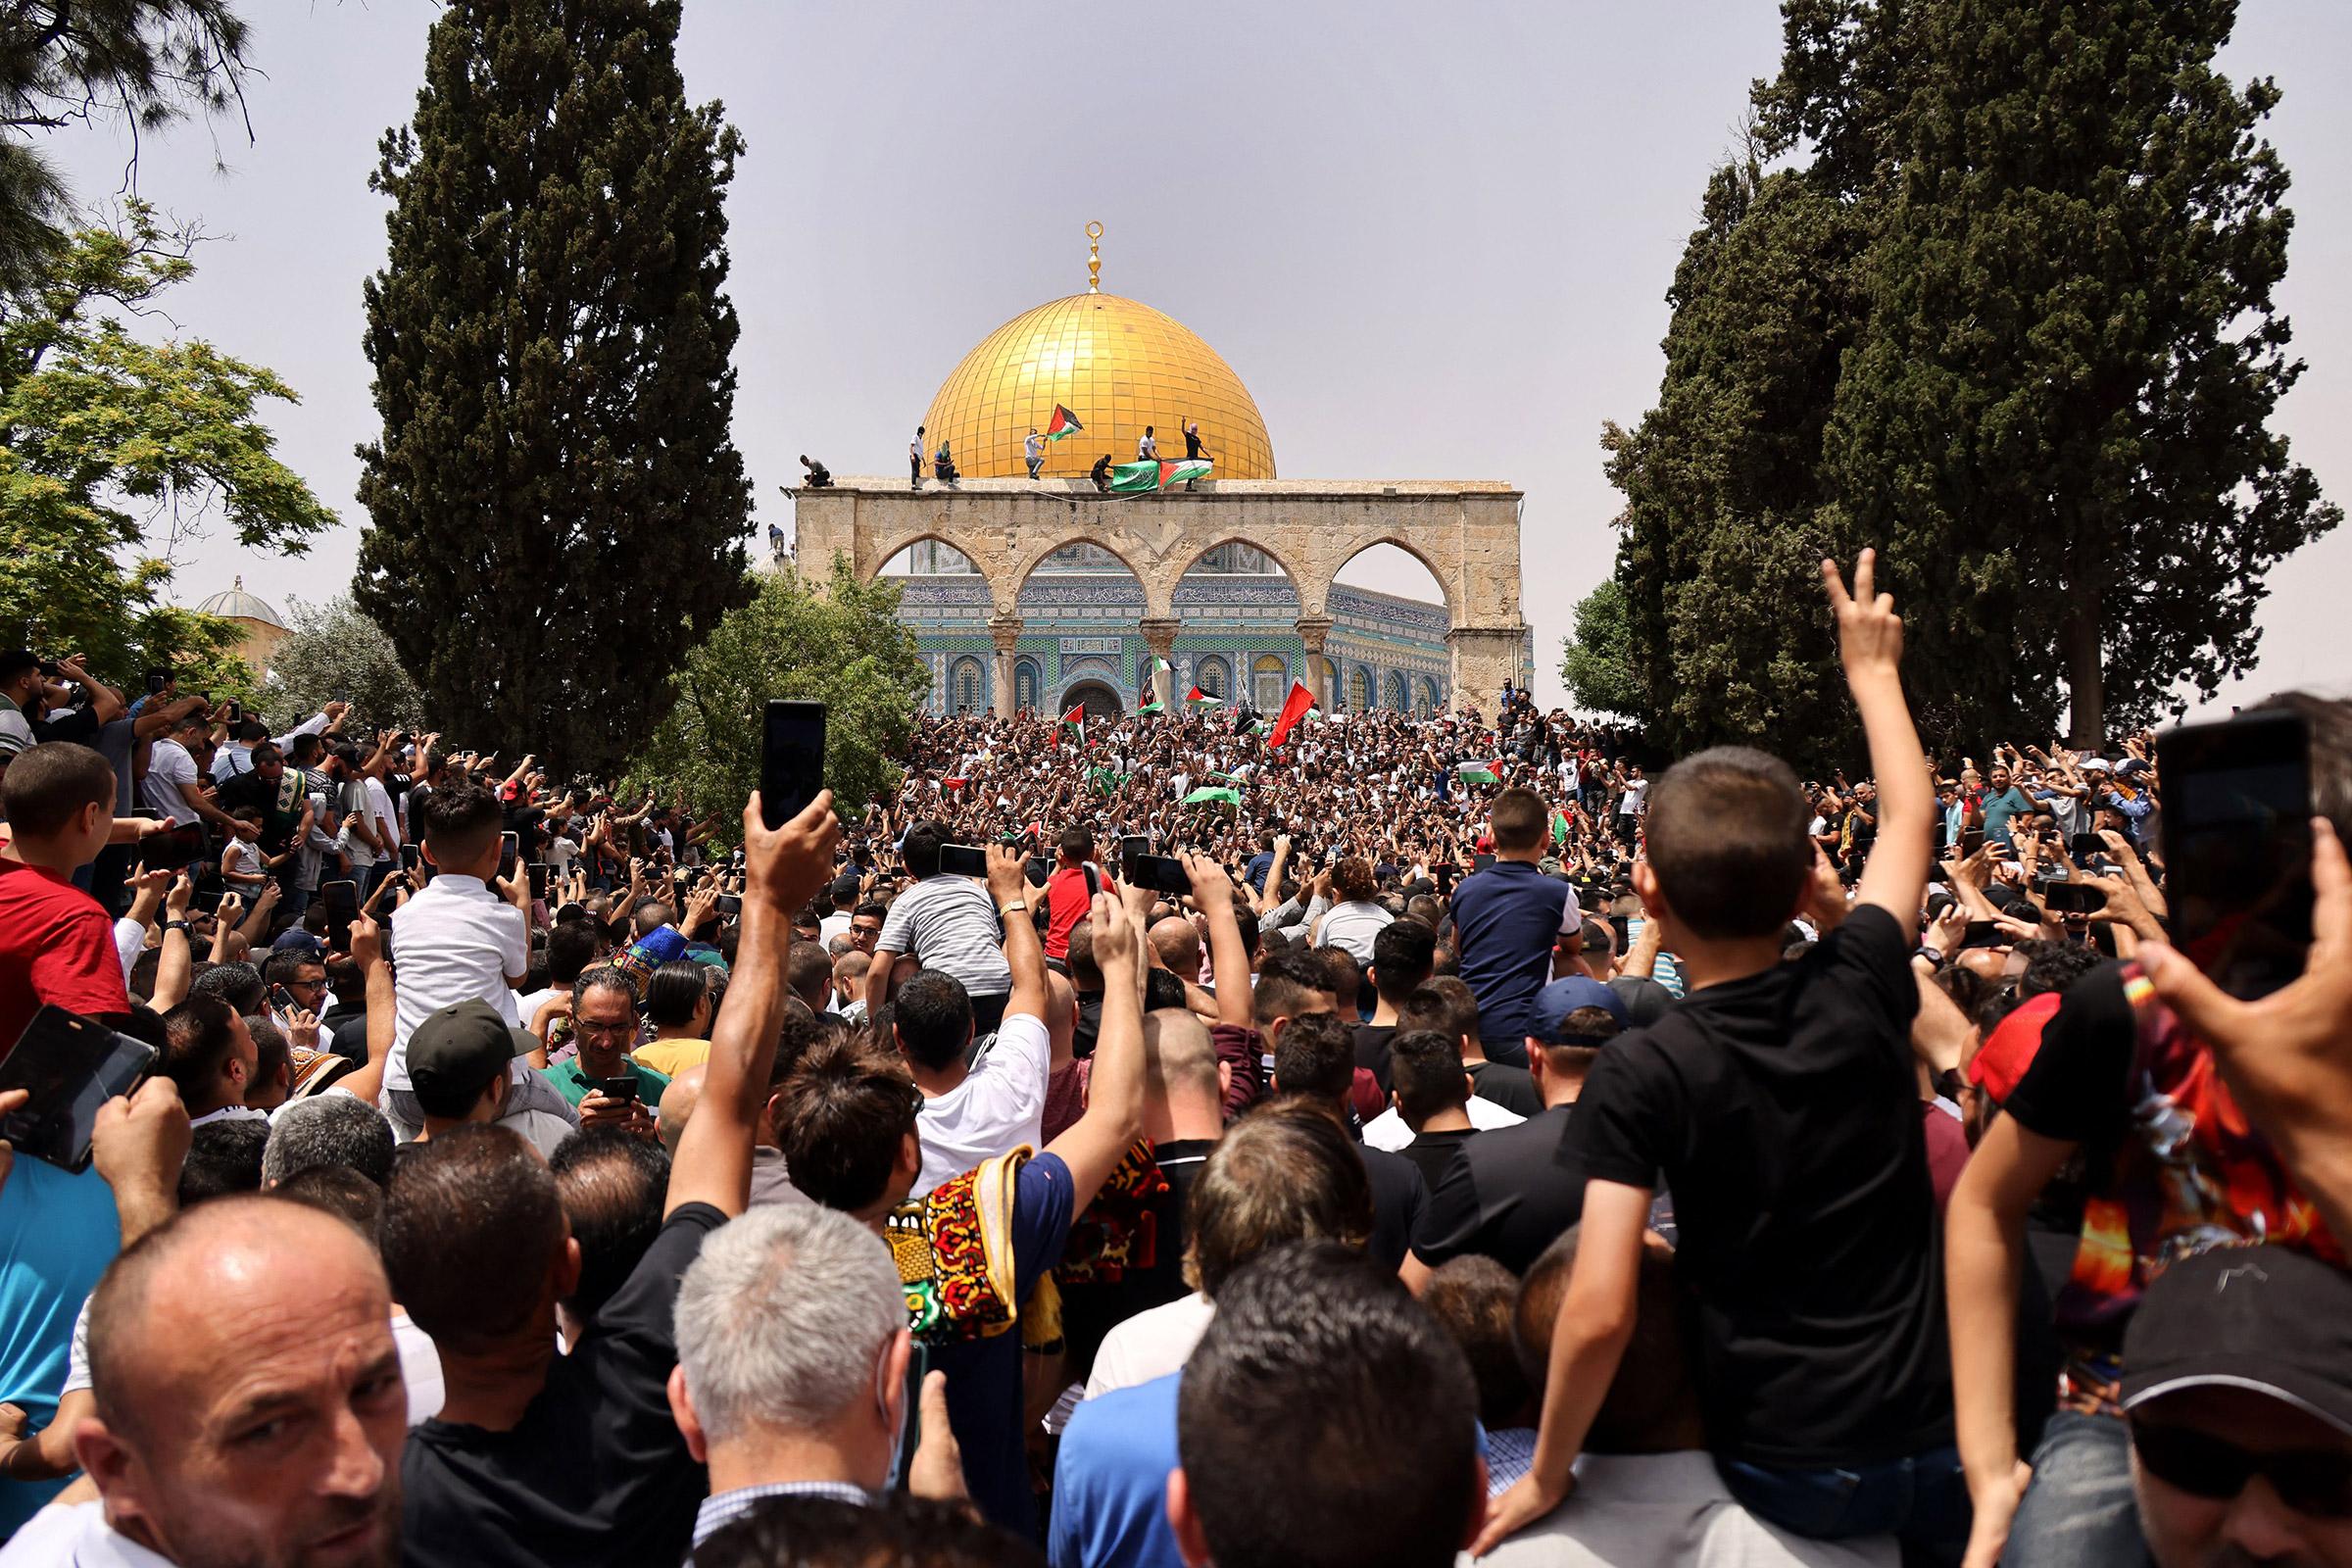 Palestinian Muslim worshippers gather at Al-Aqsa mosque compound in Jerusalem on May 21, 2021.